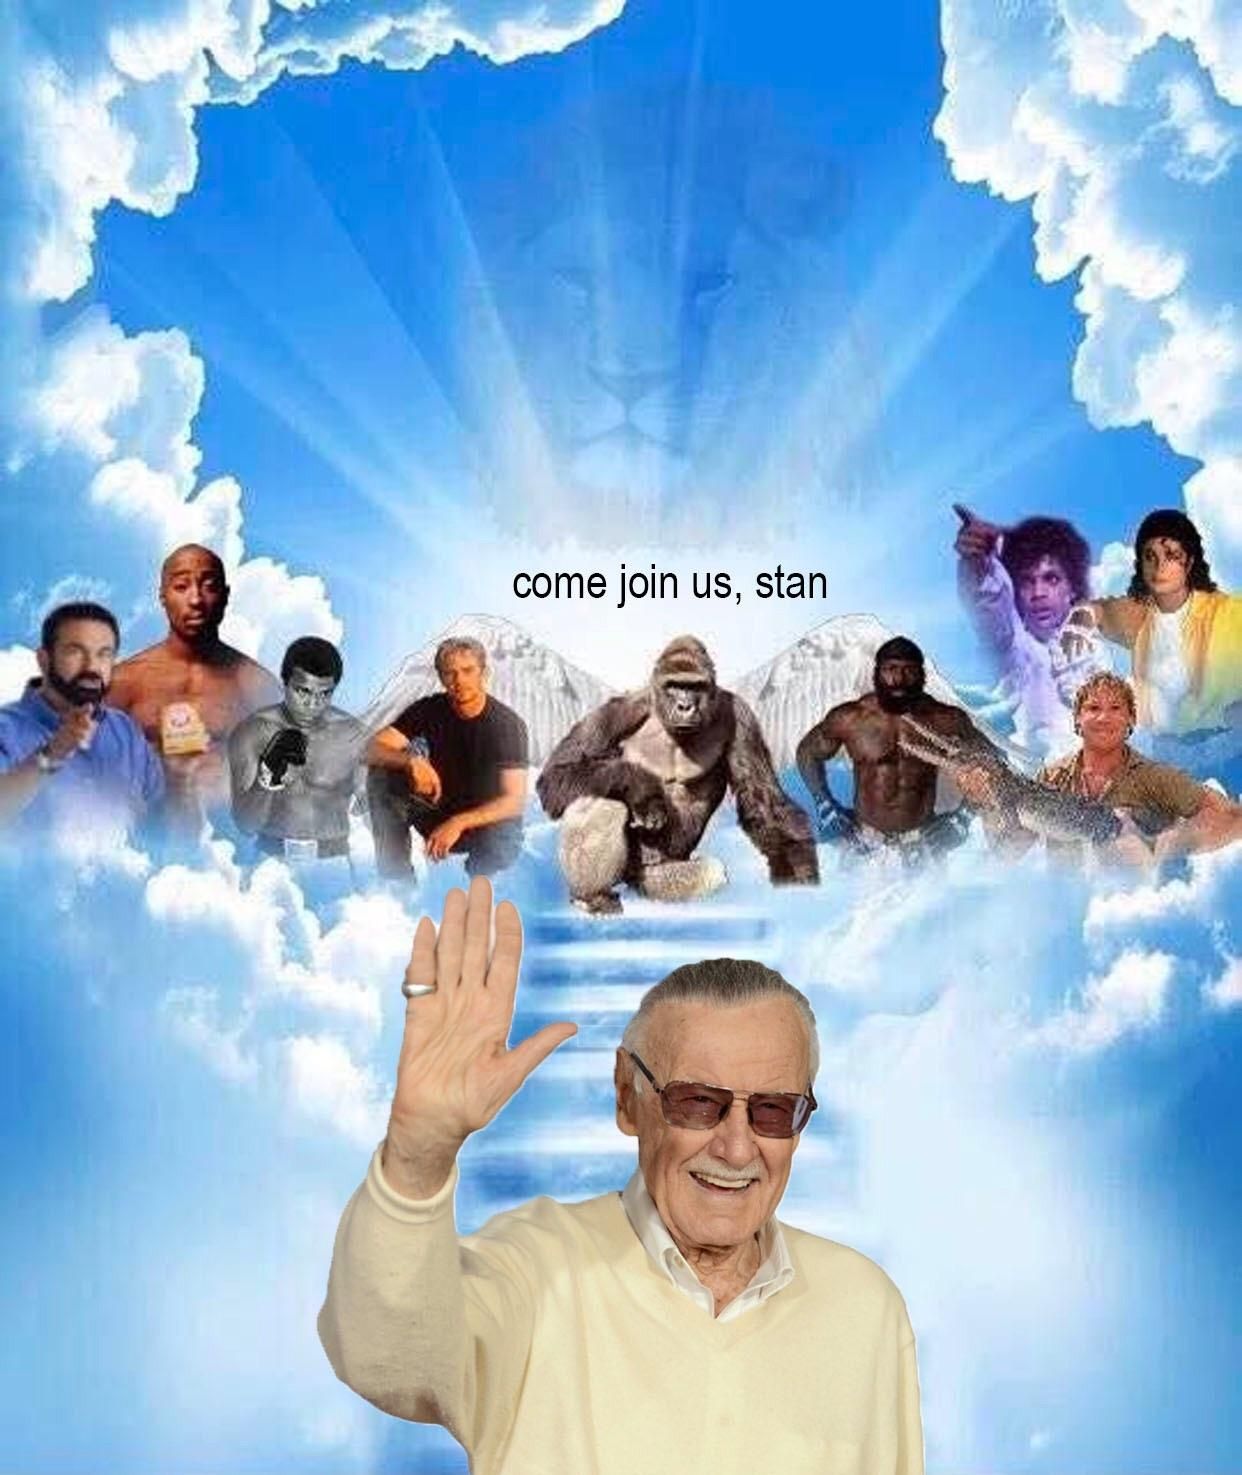 Big F to the legend